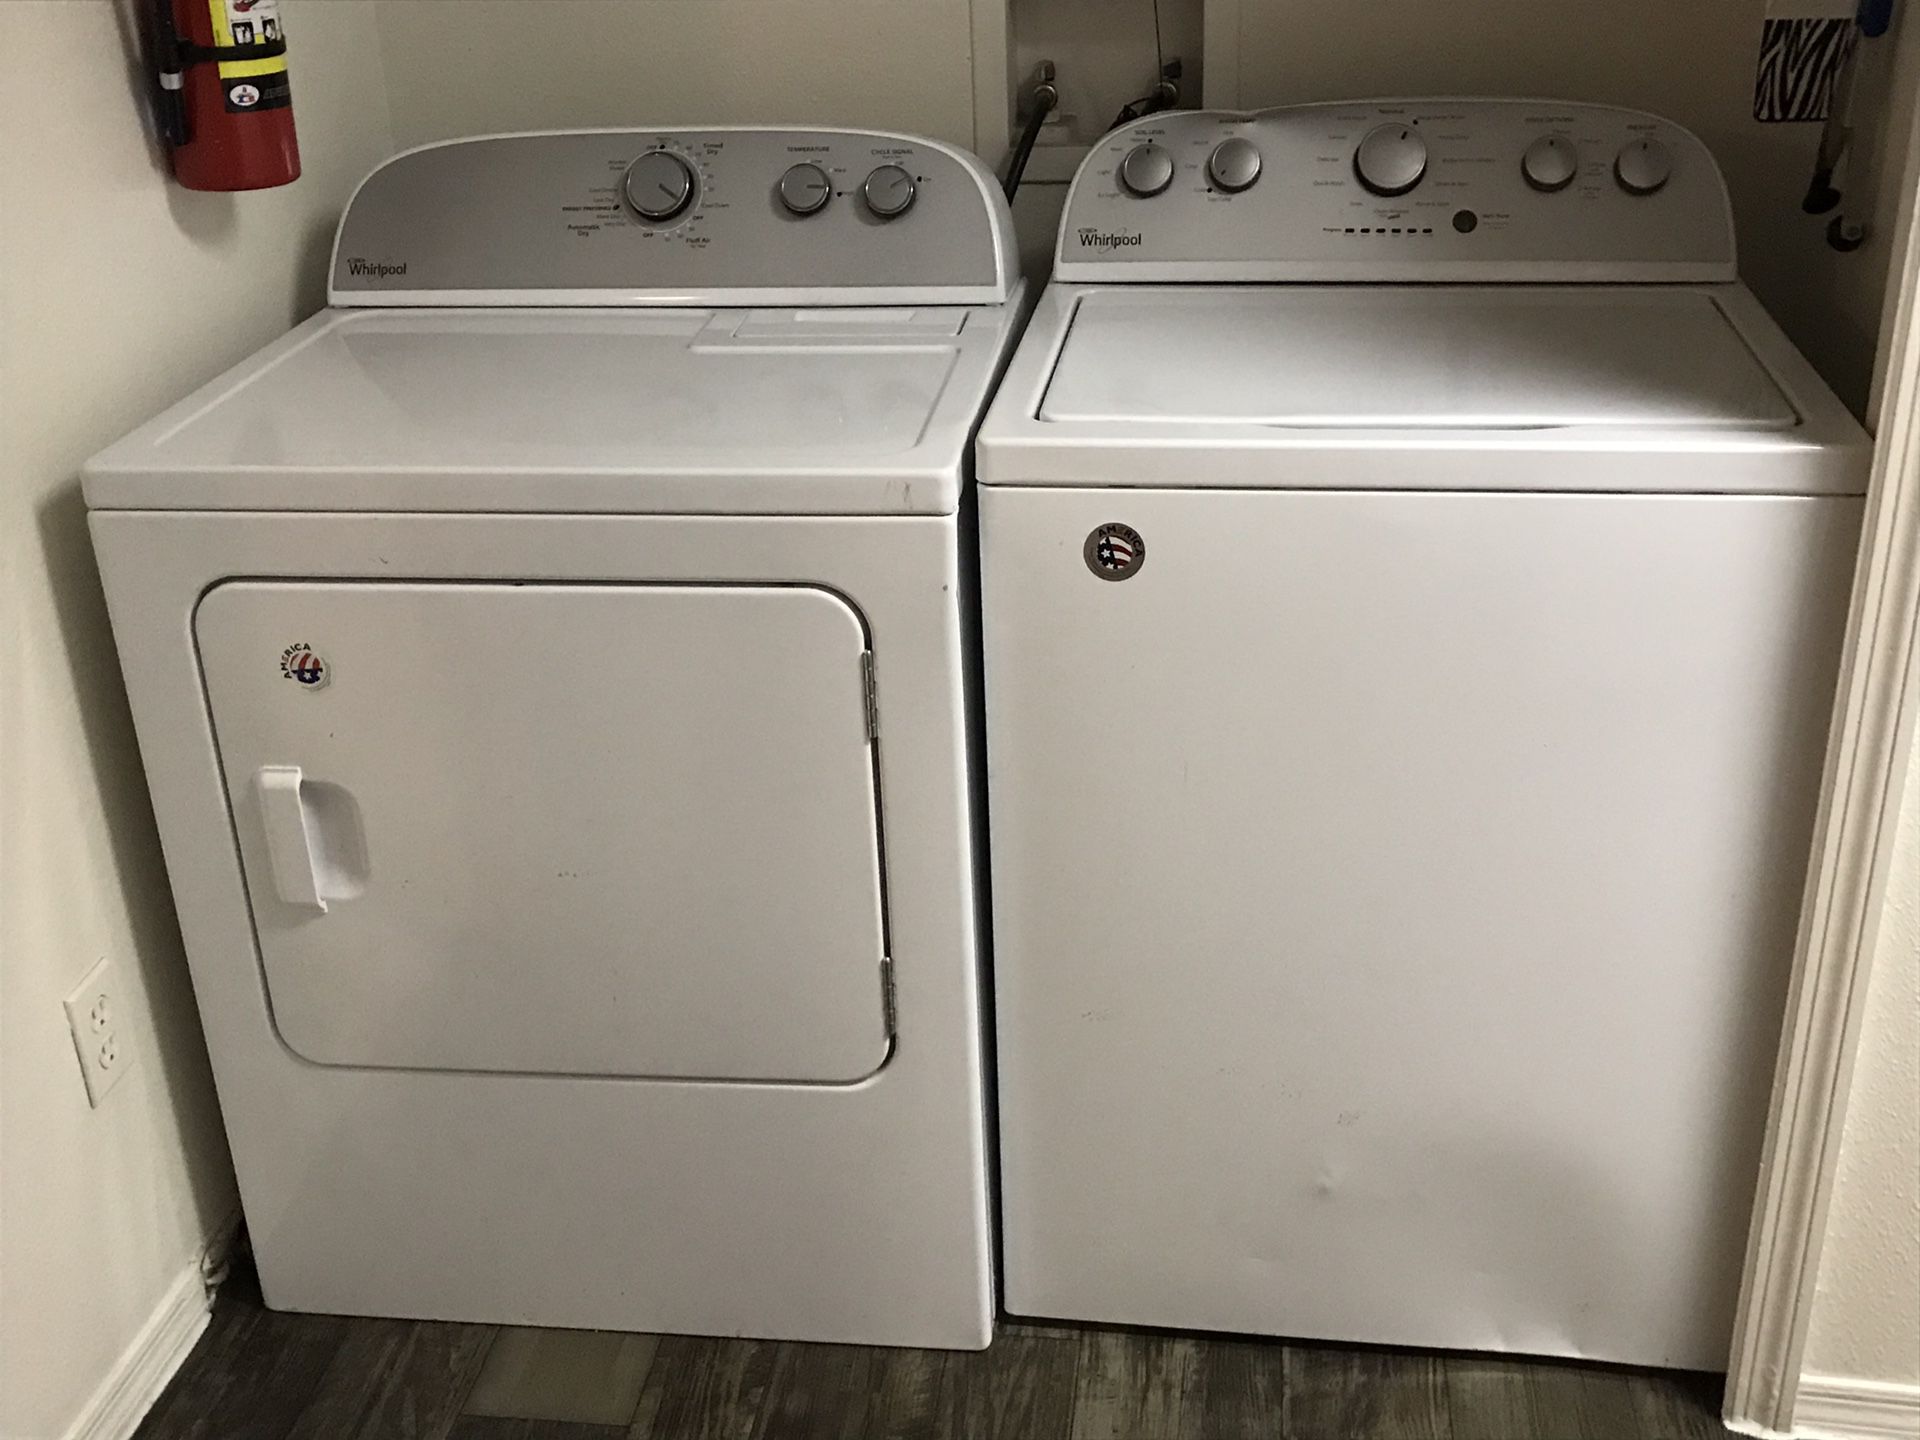 Whirlpool HE washer and dryer set